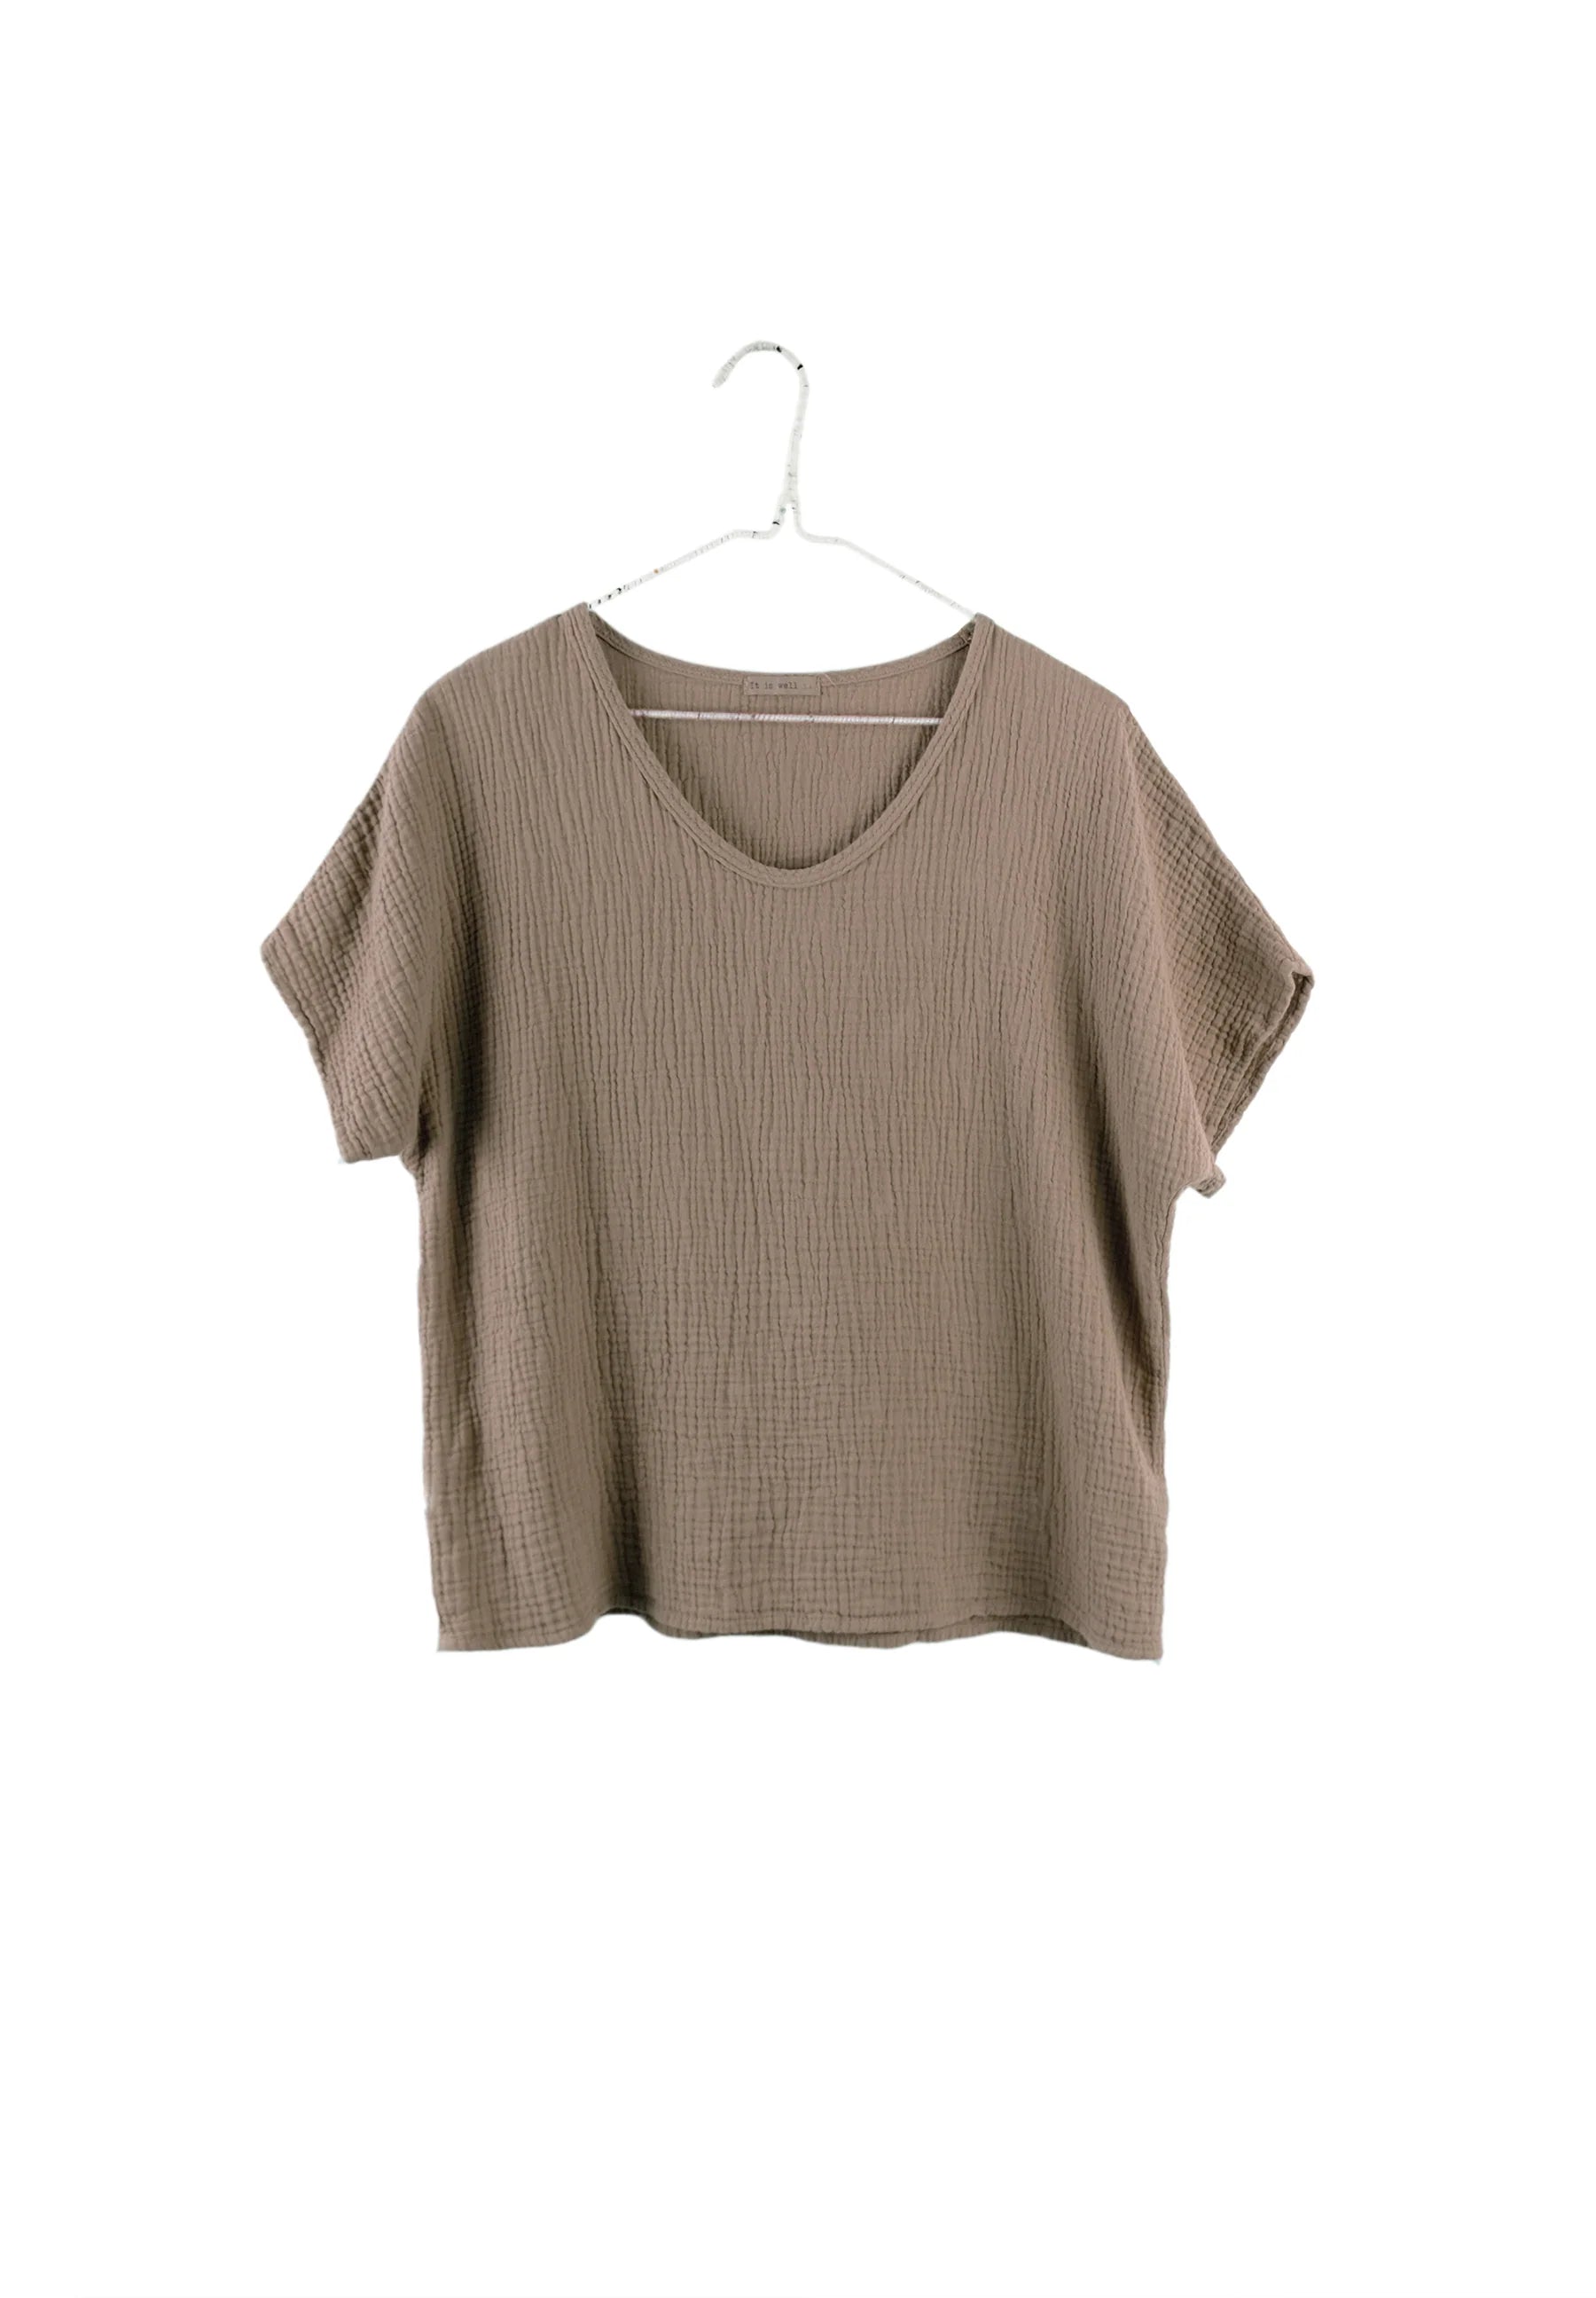 SS24 - It is Well L.A Organic Short Sleeves Gauze Top in Warm Taupe